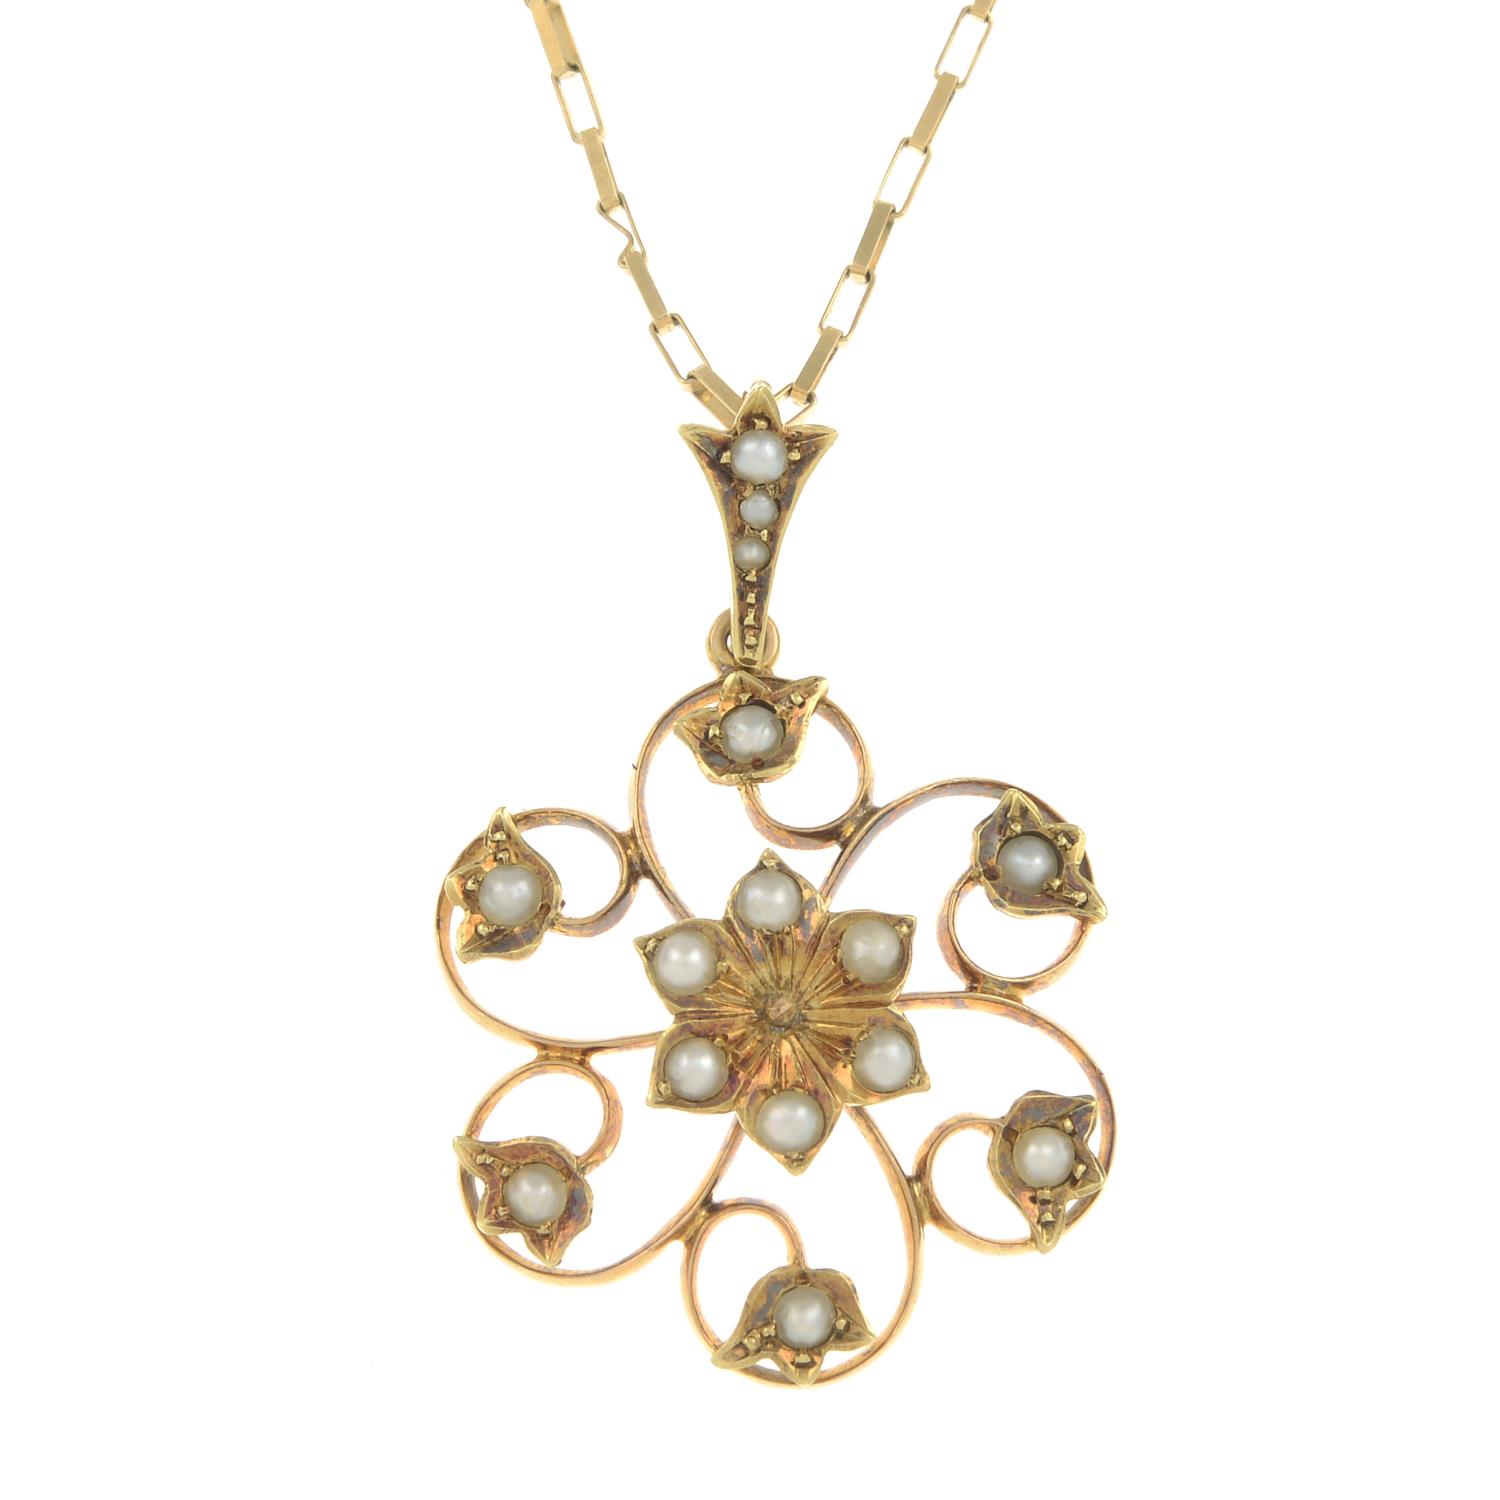 An early 20th century gold split pearl floral pendant,